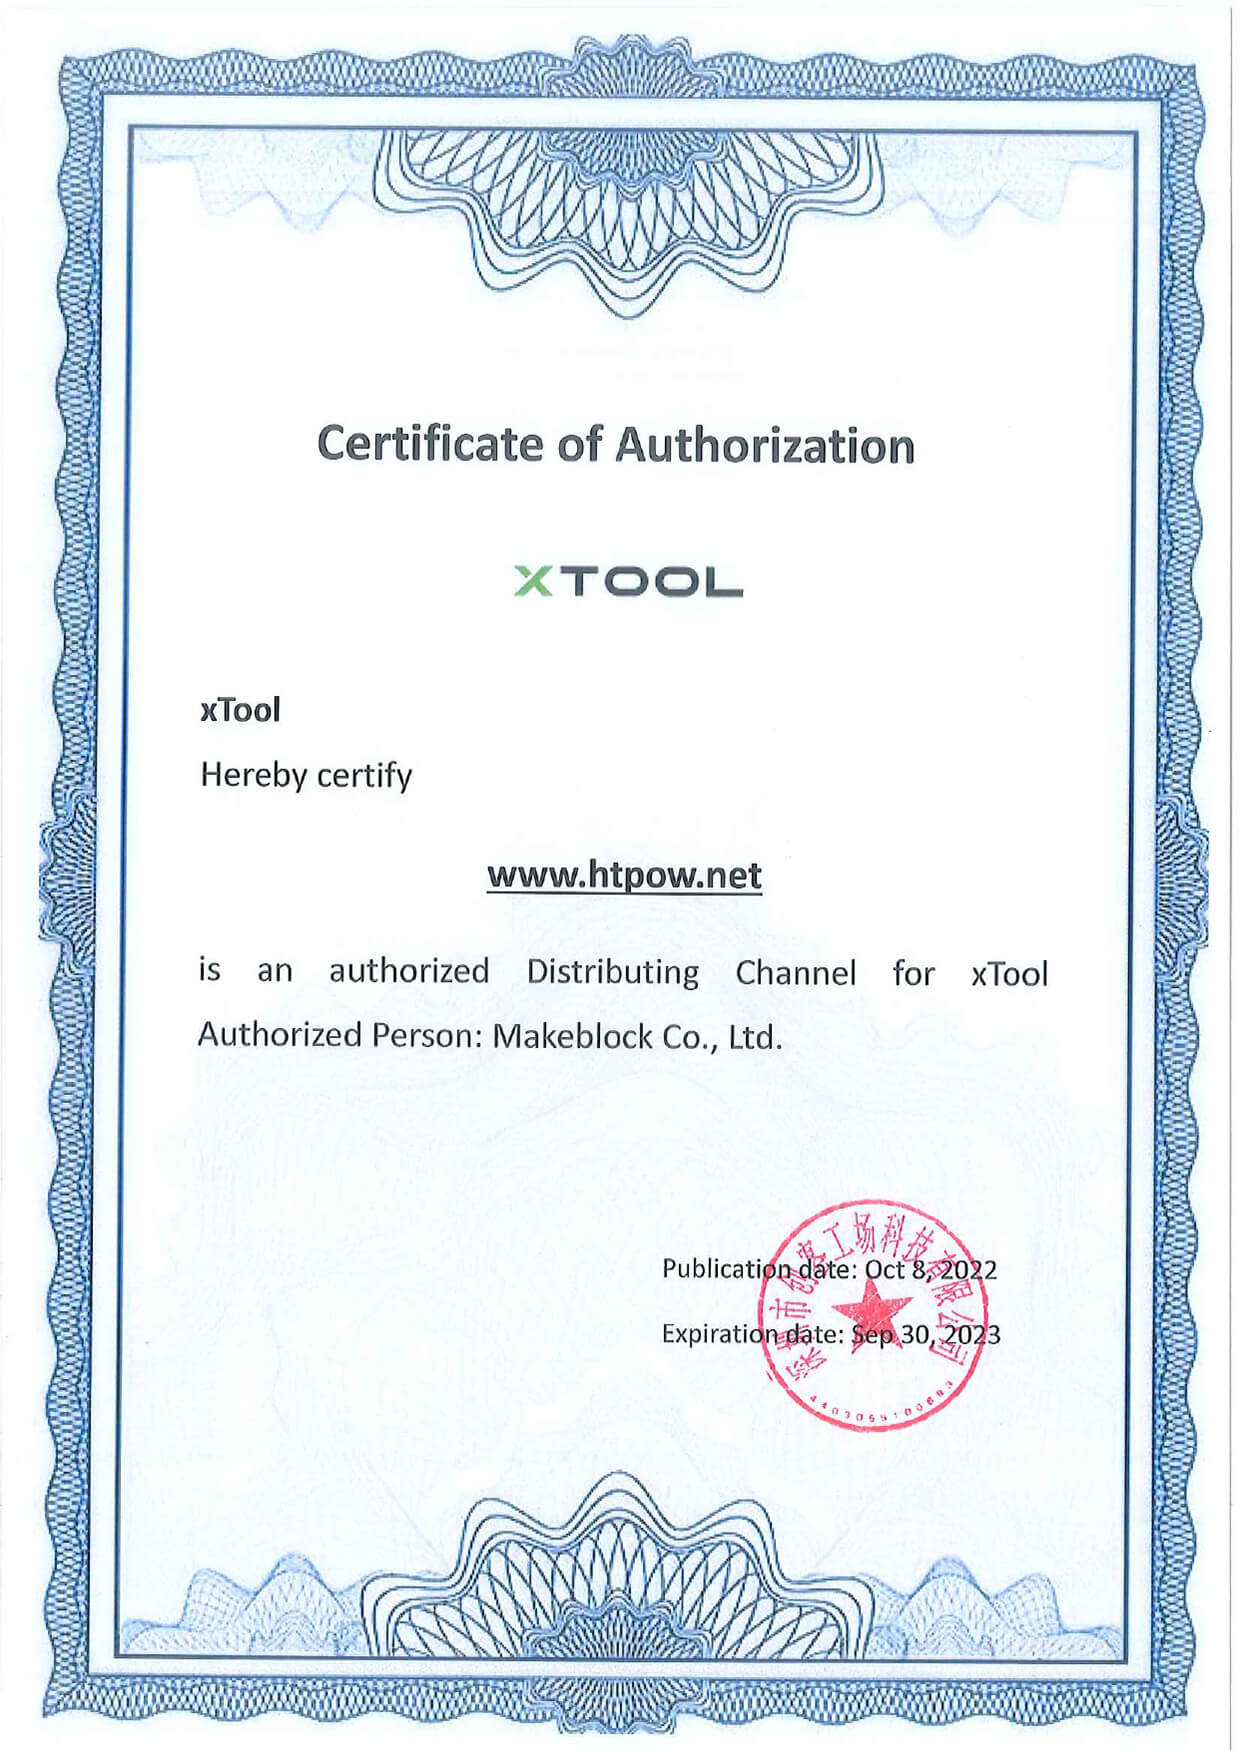 xtool certificate of authorization